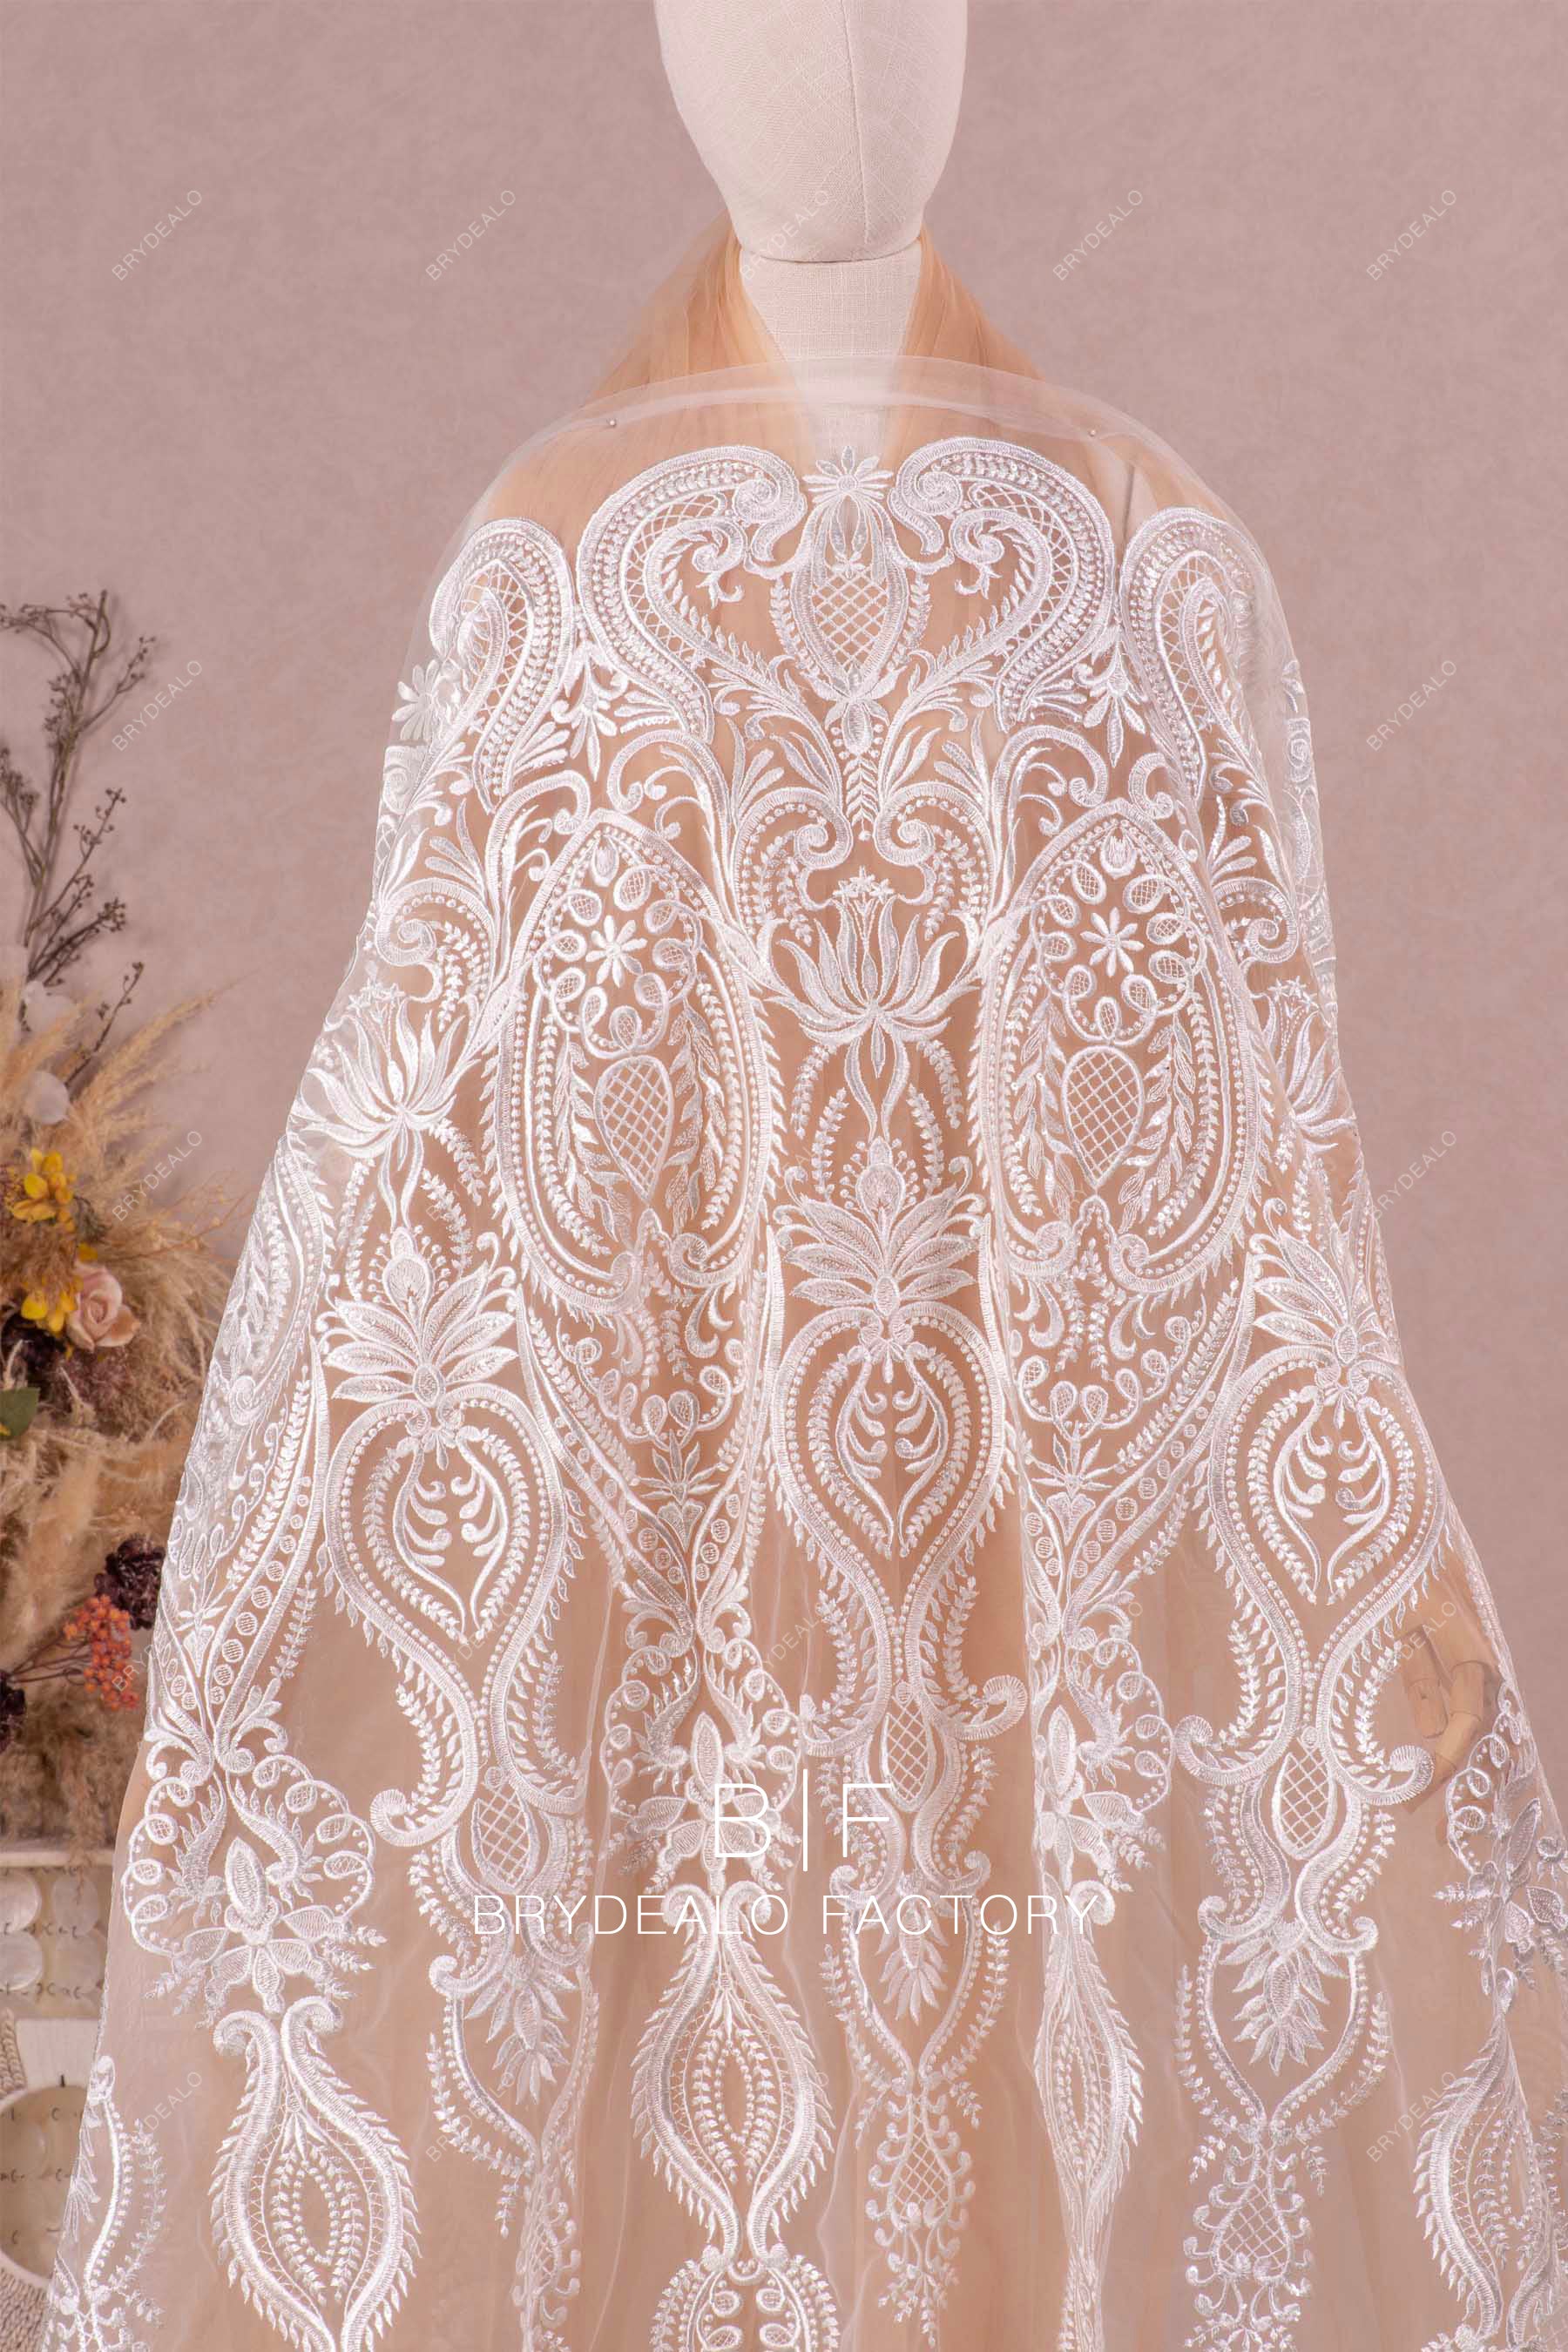 designer abstract motif embroidery lace